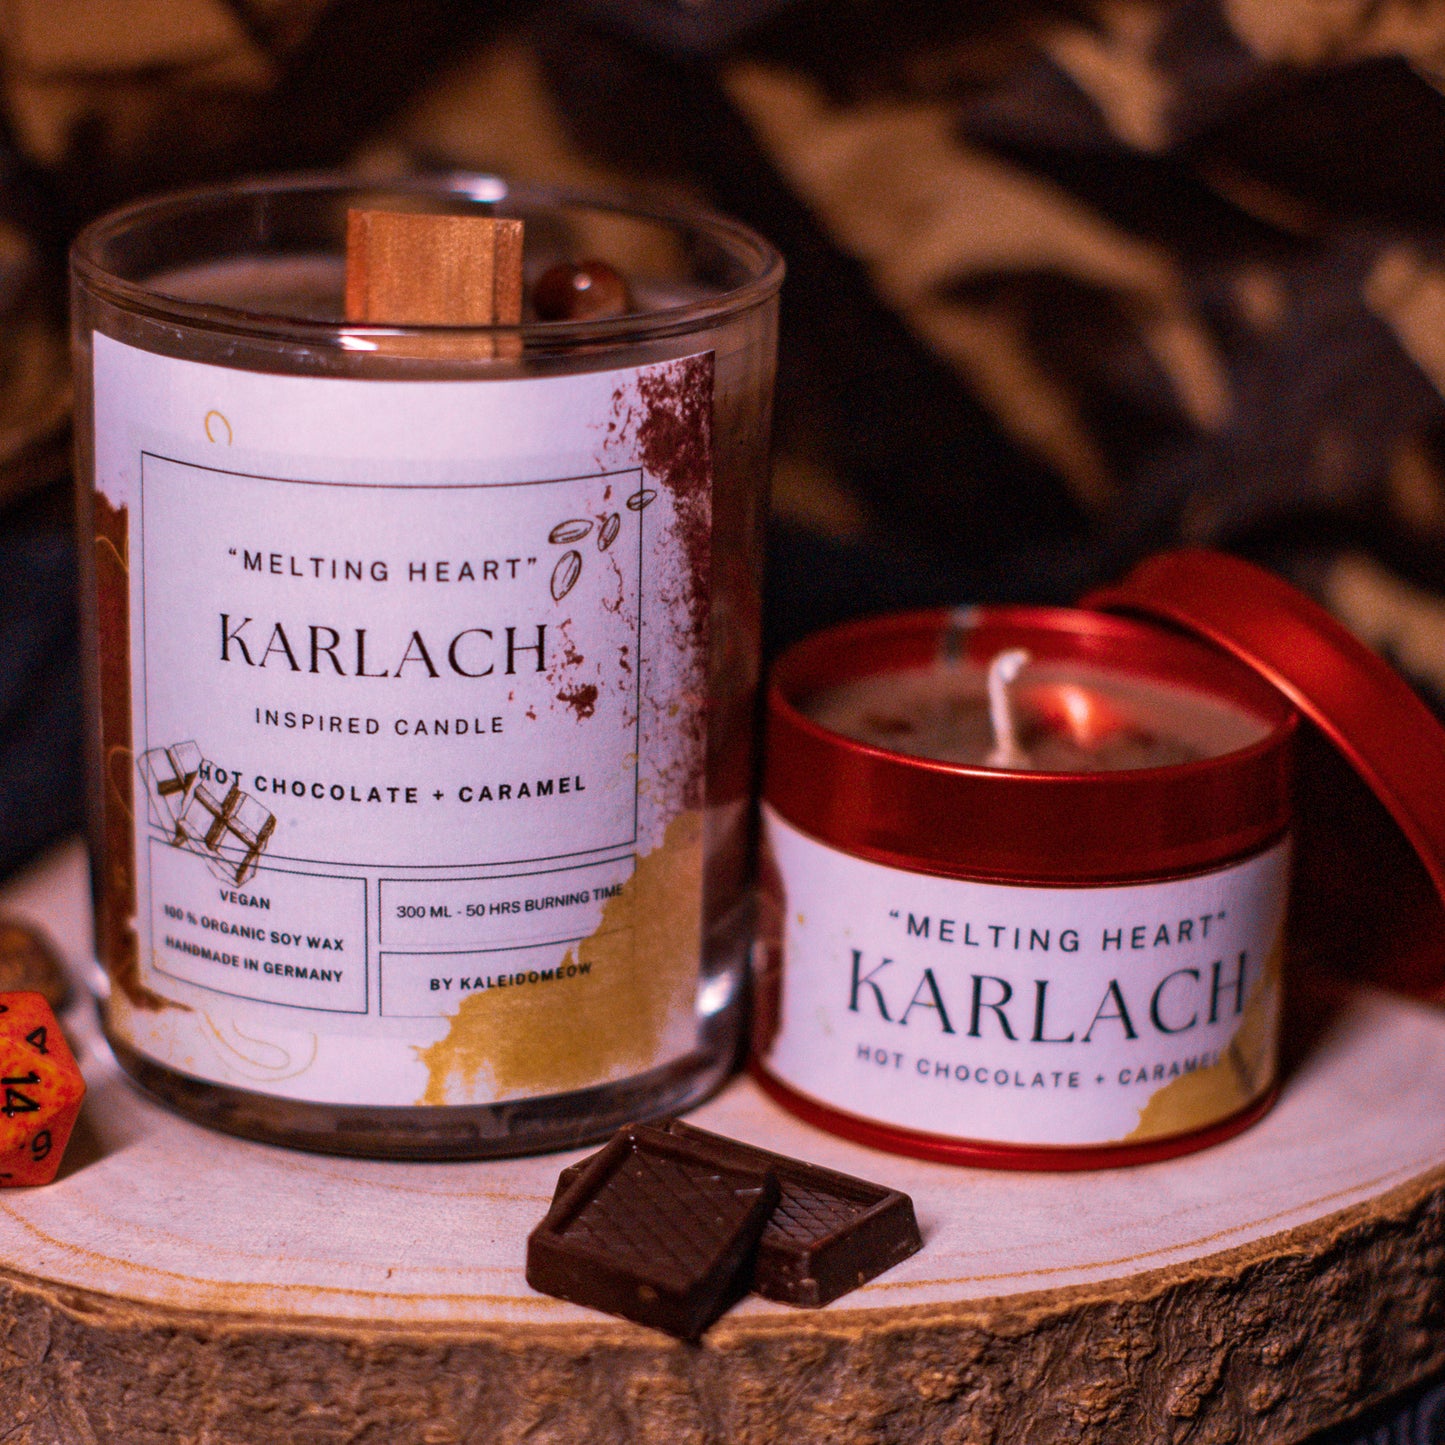 KARLACH inspired candle - 'Melting Heart' Baldur's Gate 3 inspired soy candle 100 ML